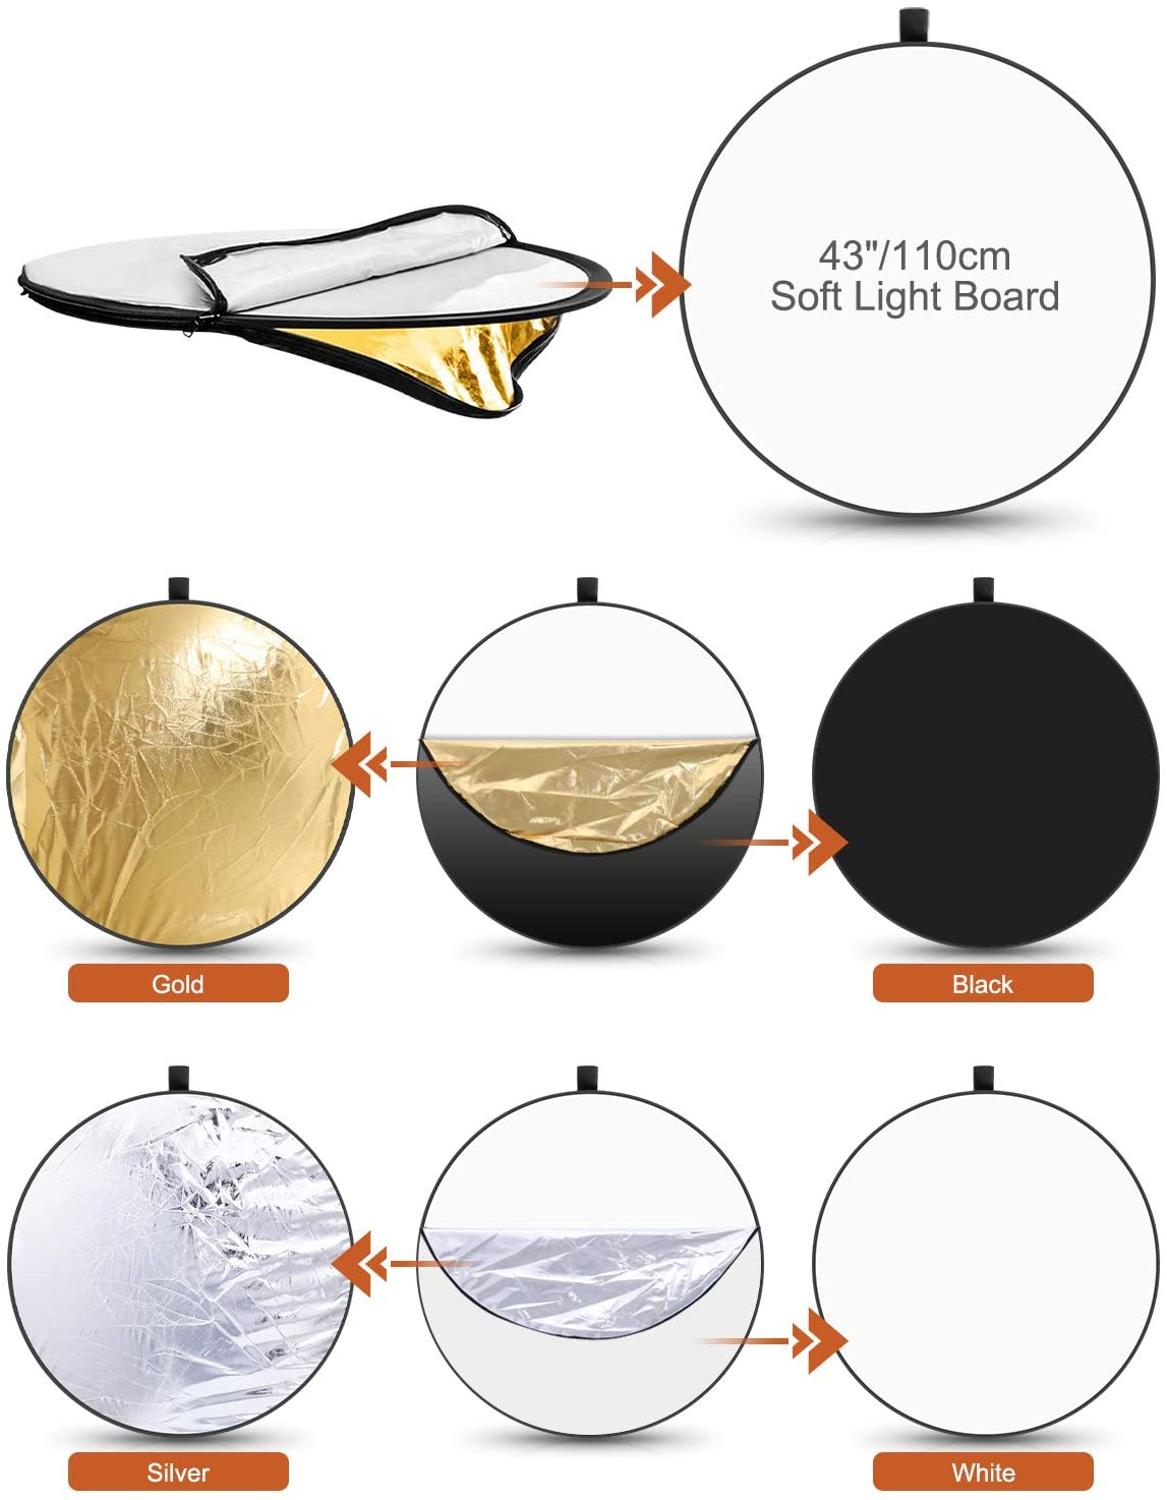 110cm Light Reflector 5 in 1 Multi Disc Photography Studio Photo Round Collapsible Light Reflector Portable Photo Disc